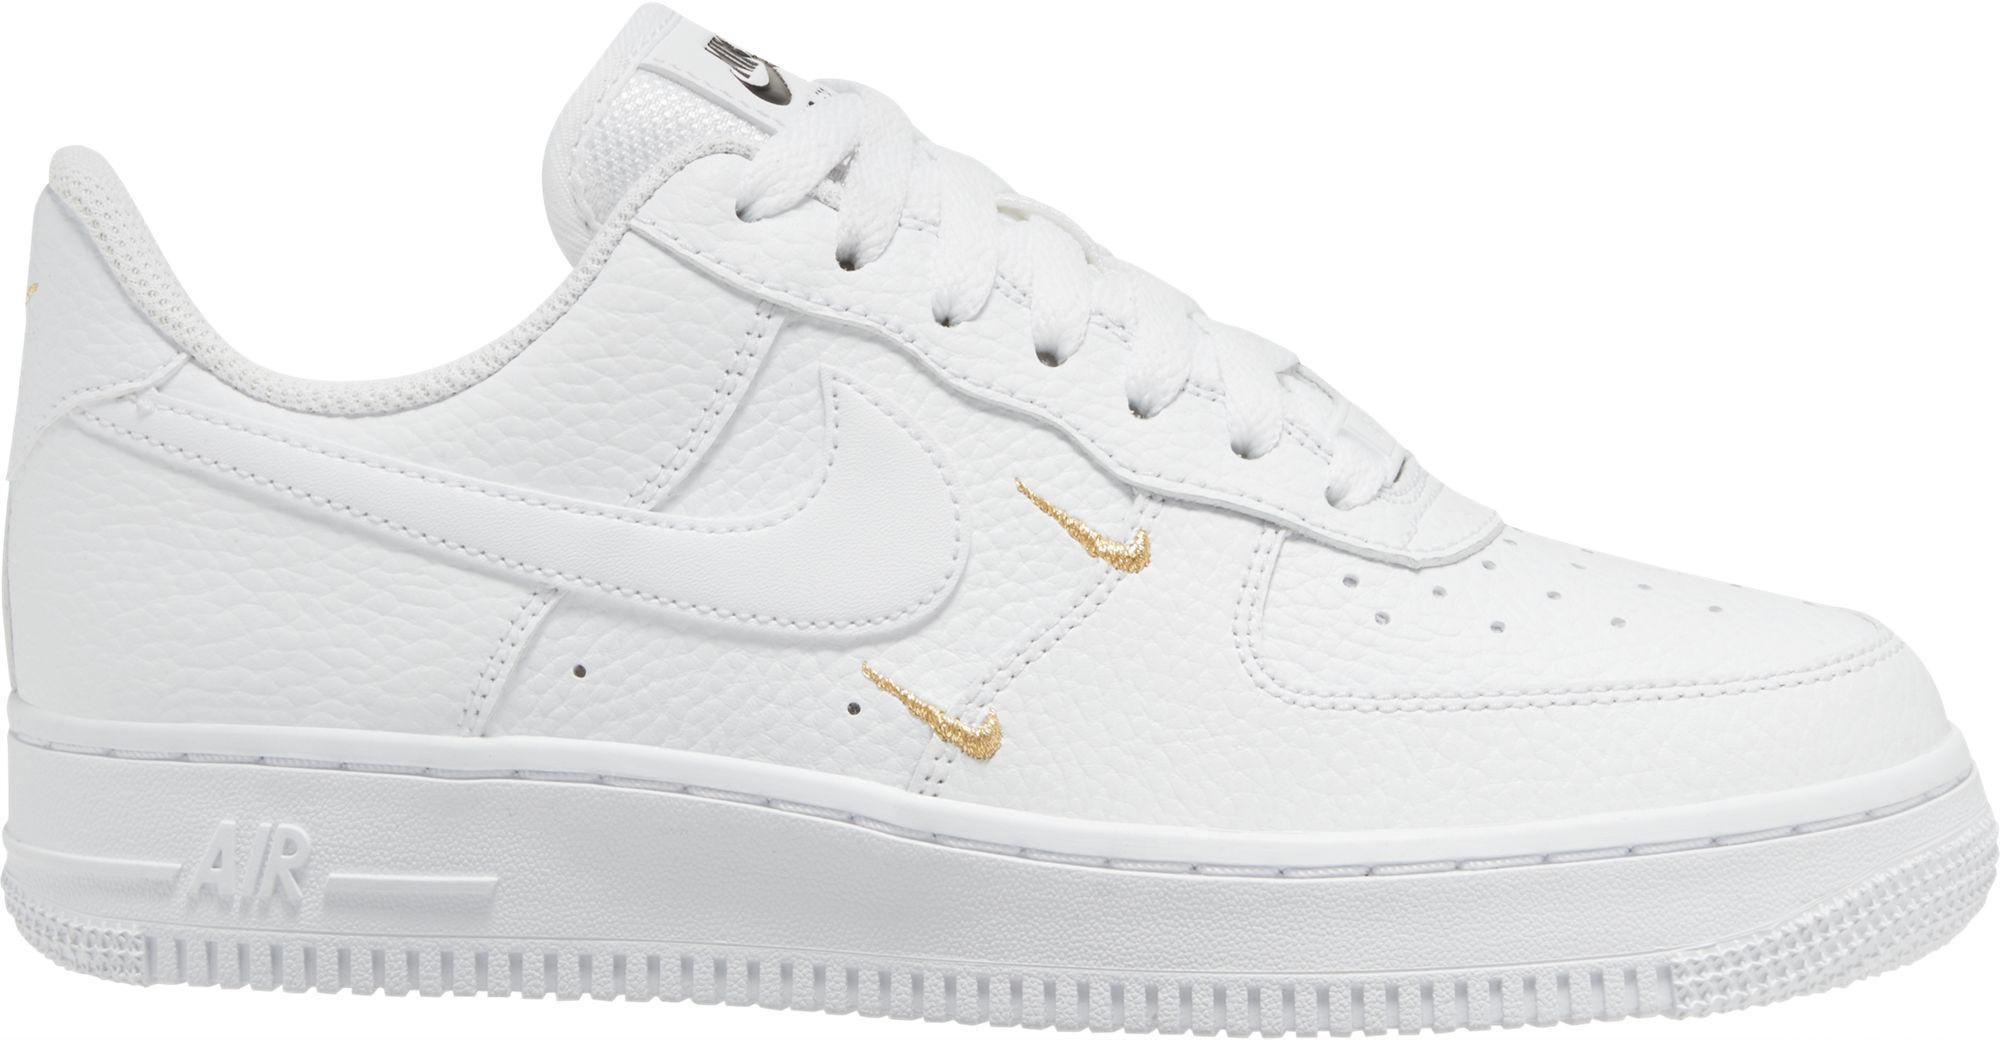 black white and gold air force 1